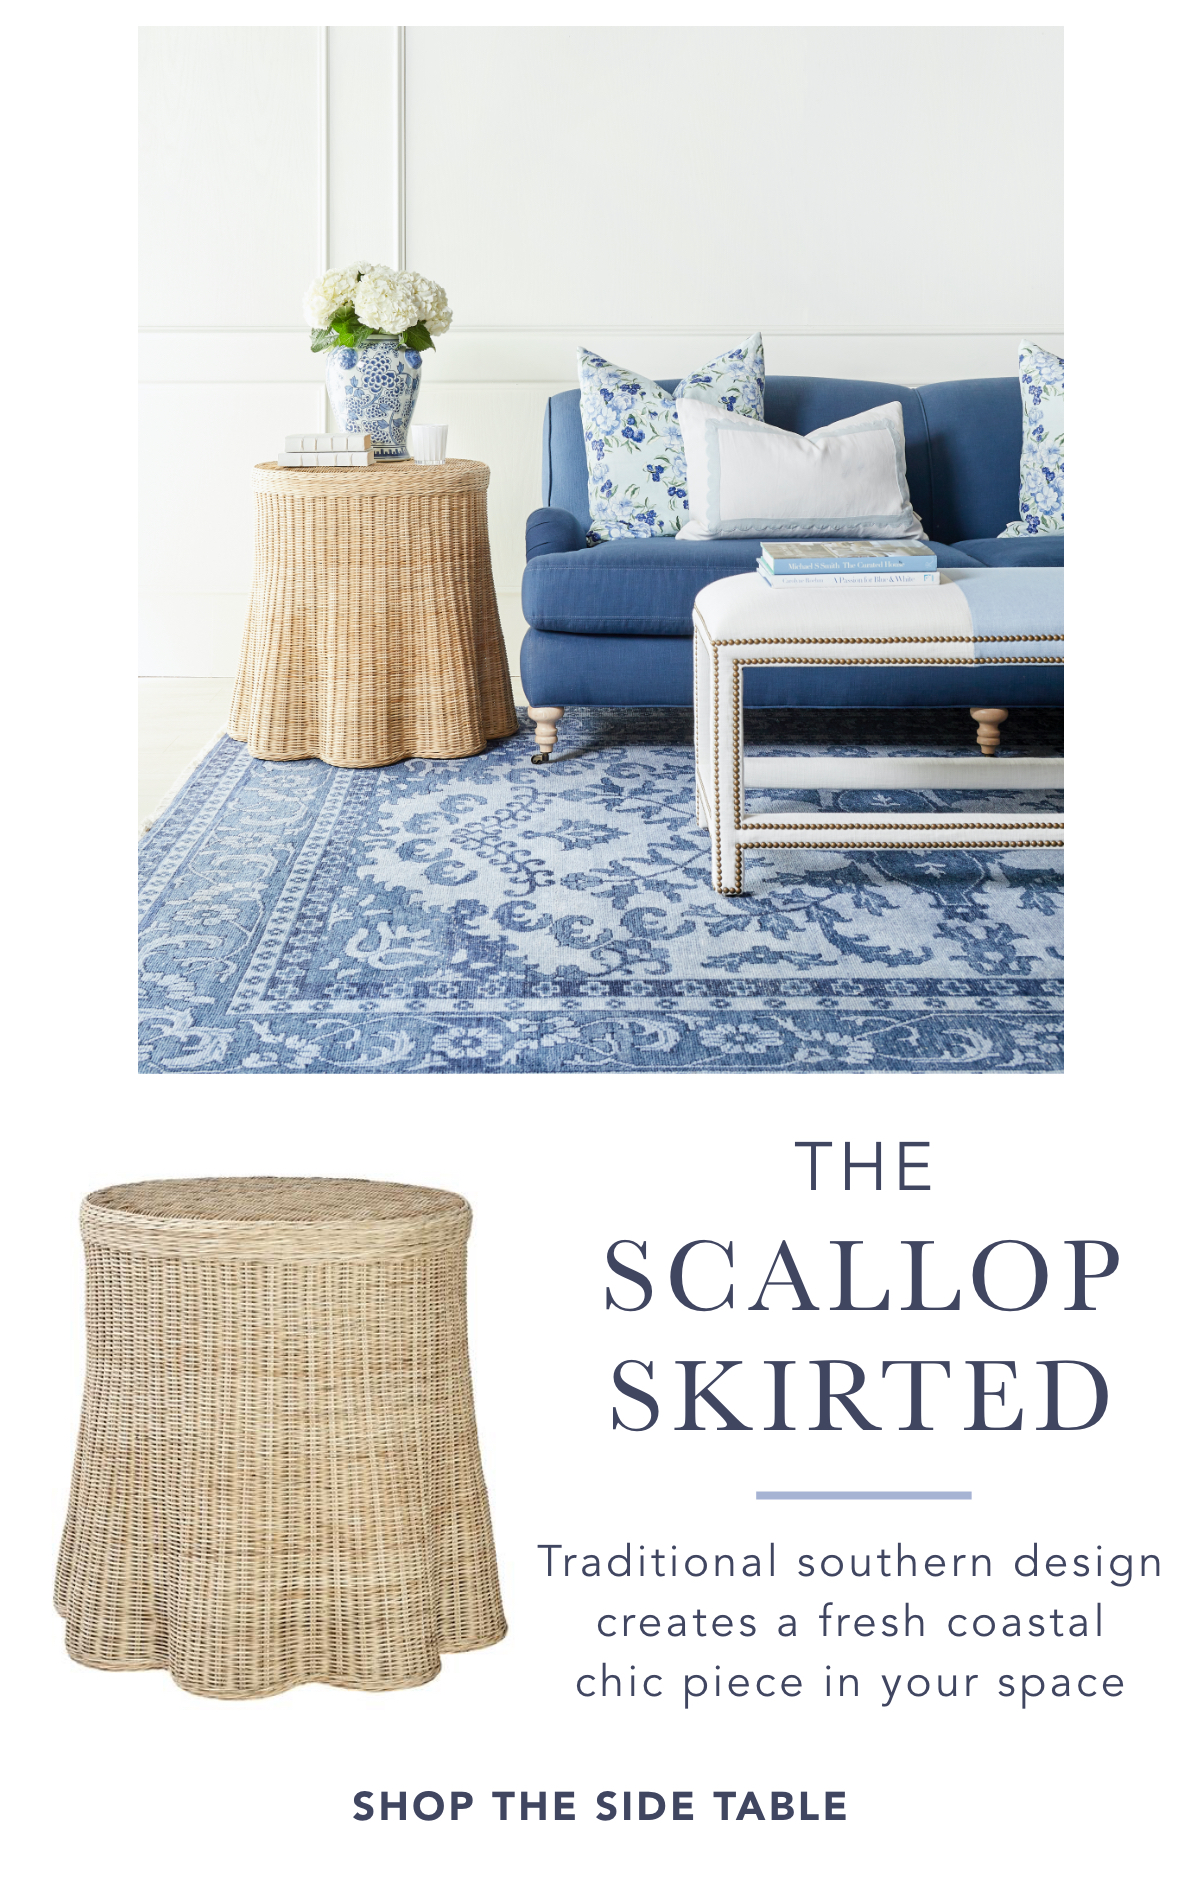 The Scallop Skirted - Traditional southern design creates a fresh coastal chic piece in your space